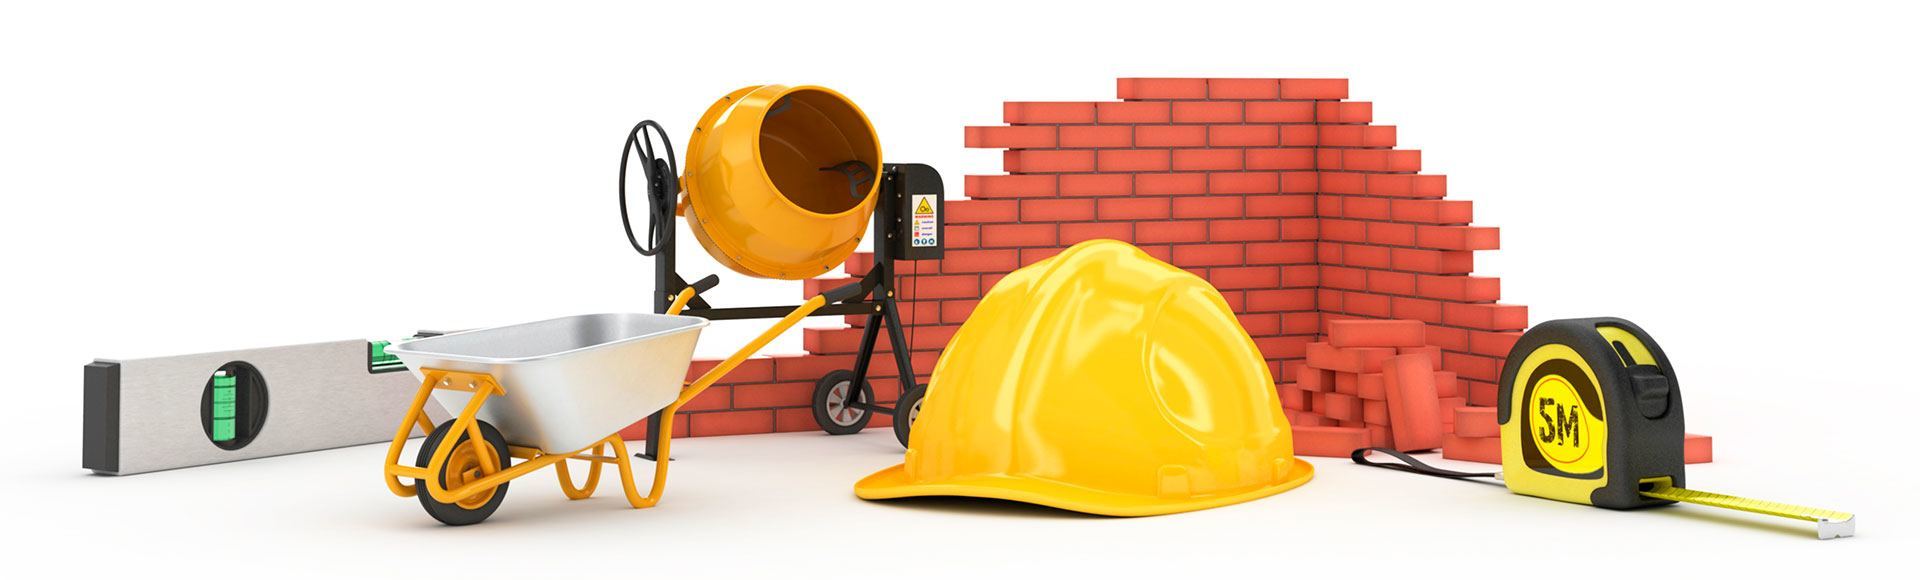 We Can Handle It Building Materials Clipart